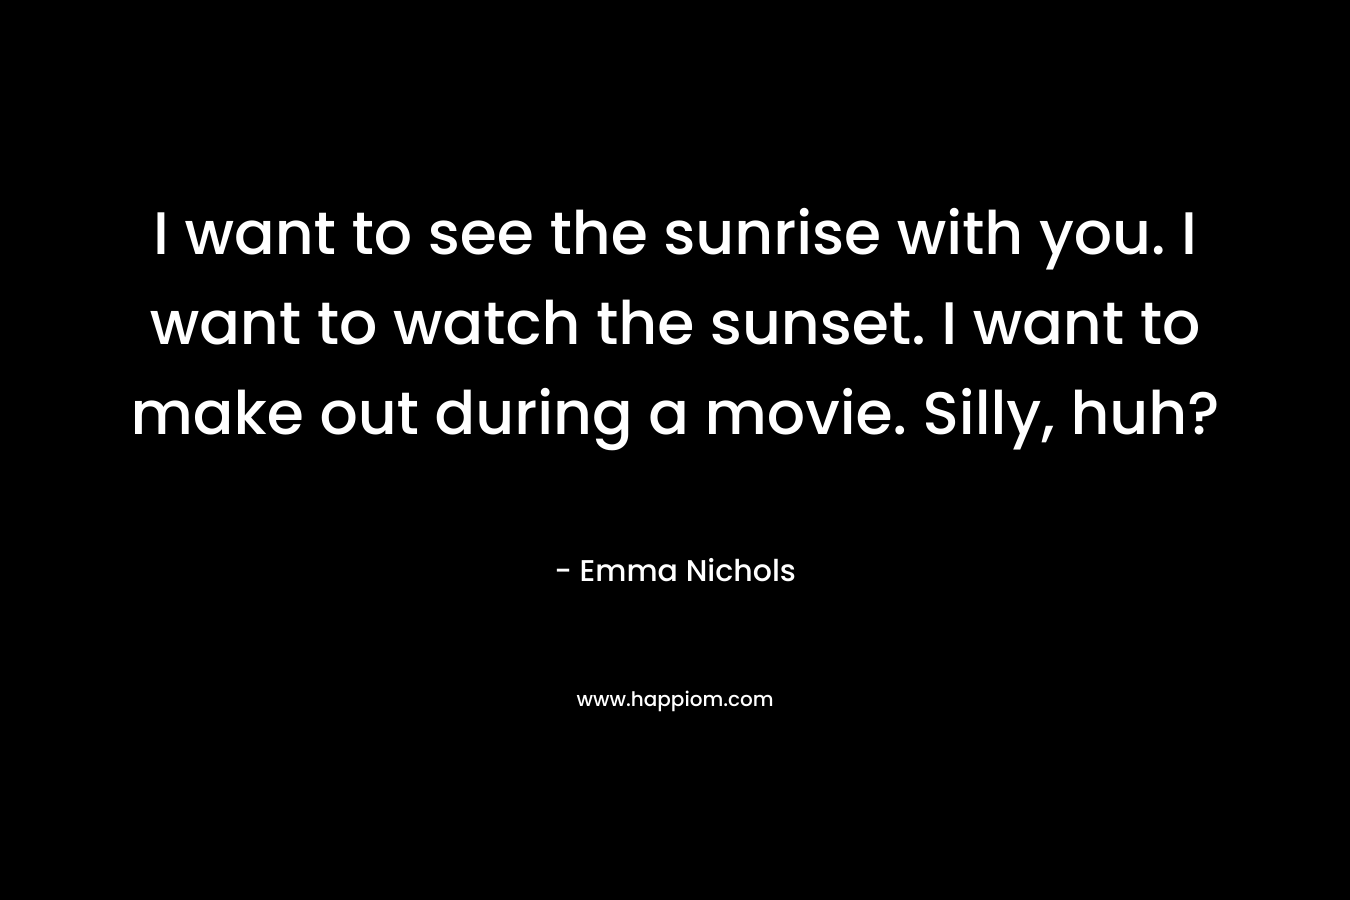 I want to see the sunrise with you. I want to watch the sunset. I want to make out during a movie. Silly, huh? – Emma Nichols